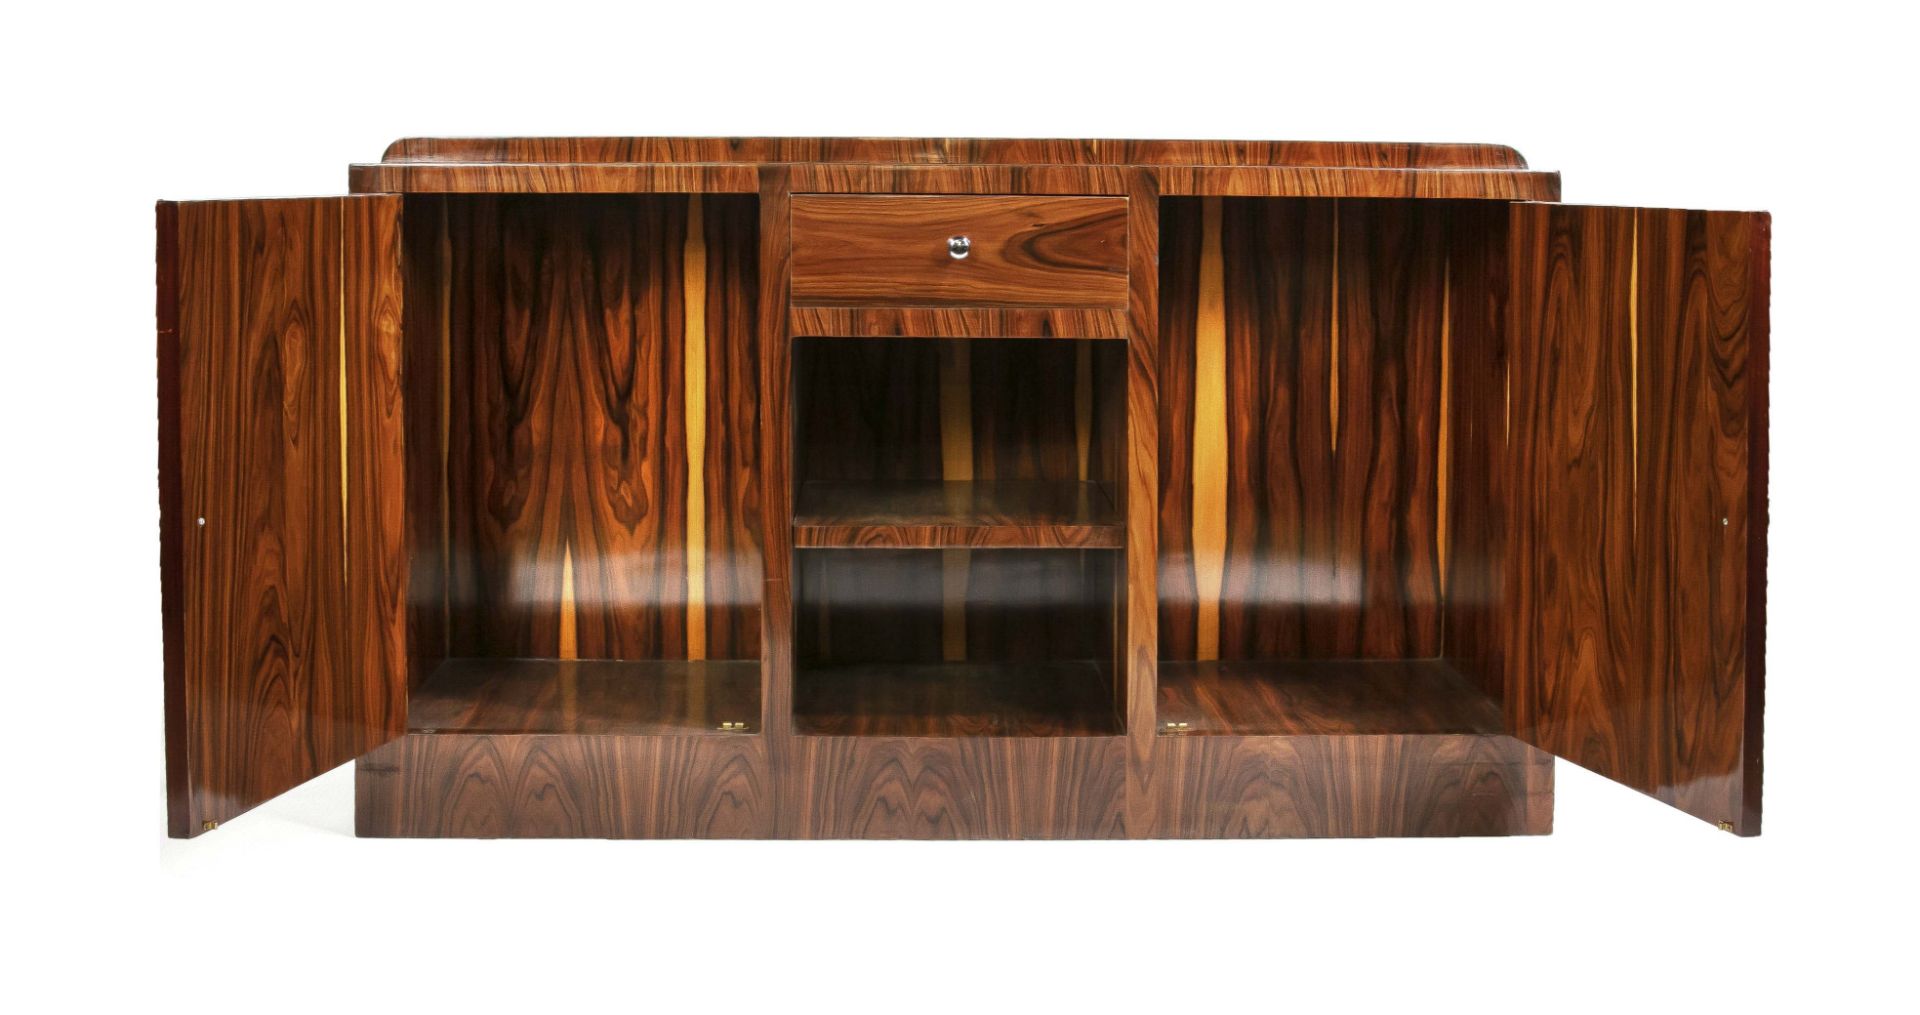 Sideboard in art deco style, end of 20th century, Indian 2-color rosewood veneer, 82,5 x 151 x 45 - Image 2 of 3